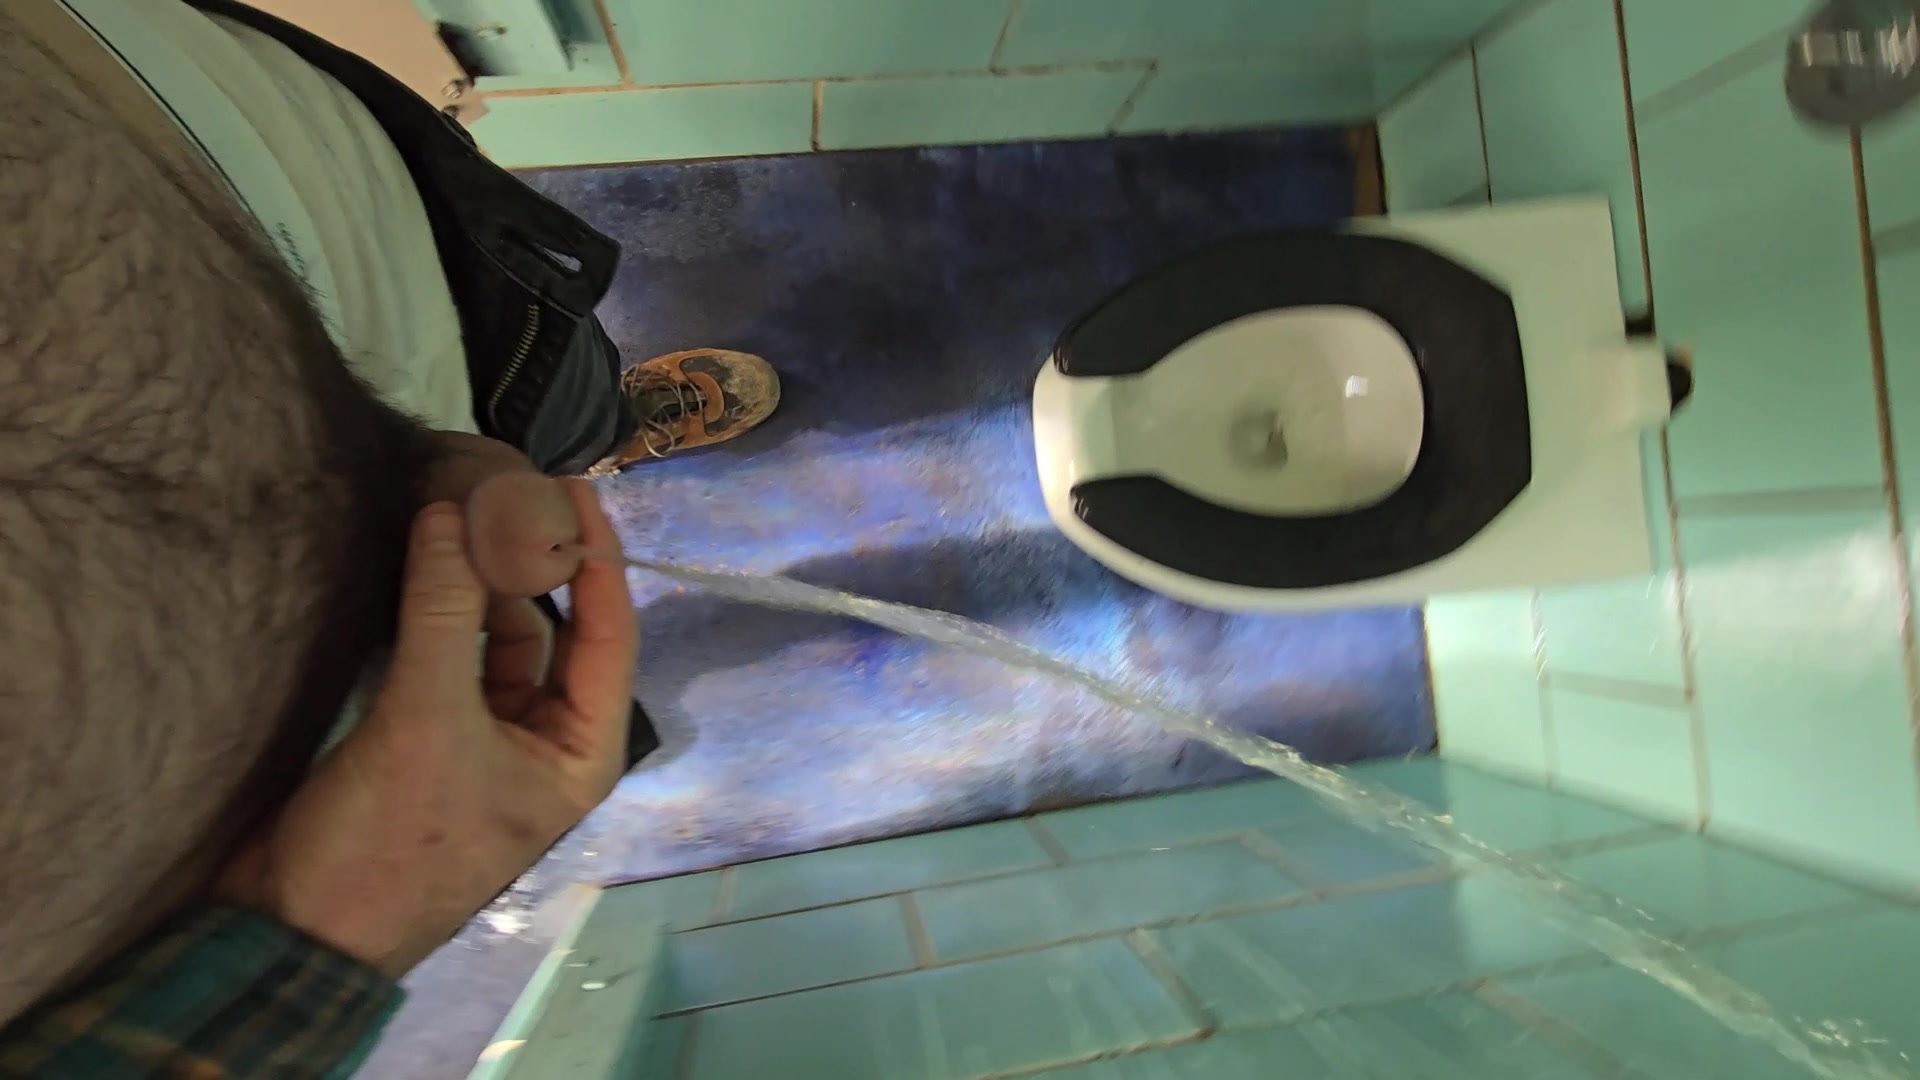 Piss Trashing Campground Toilet in Tighty Whities 4